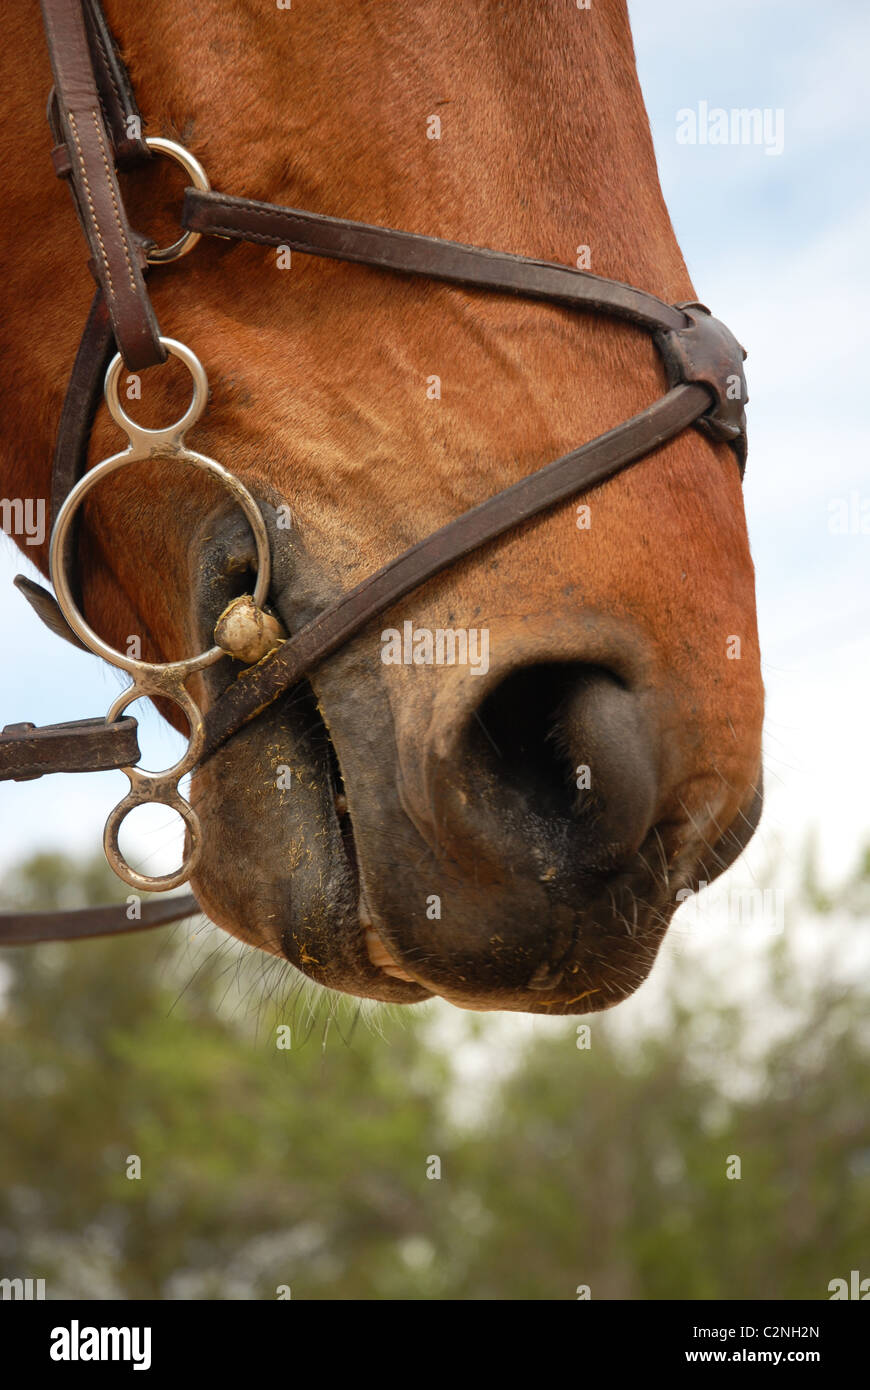 close up of a horse bridle on a head of horse Stock Photo